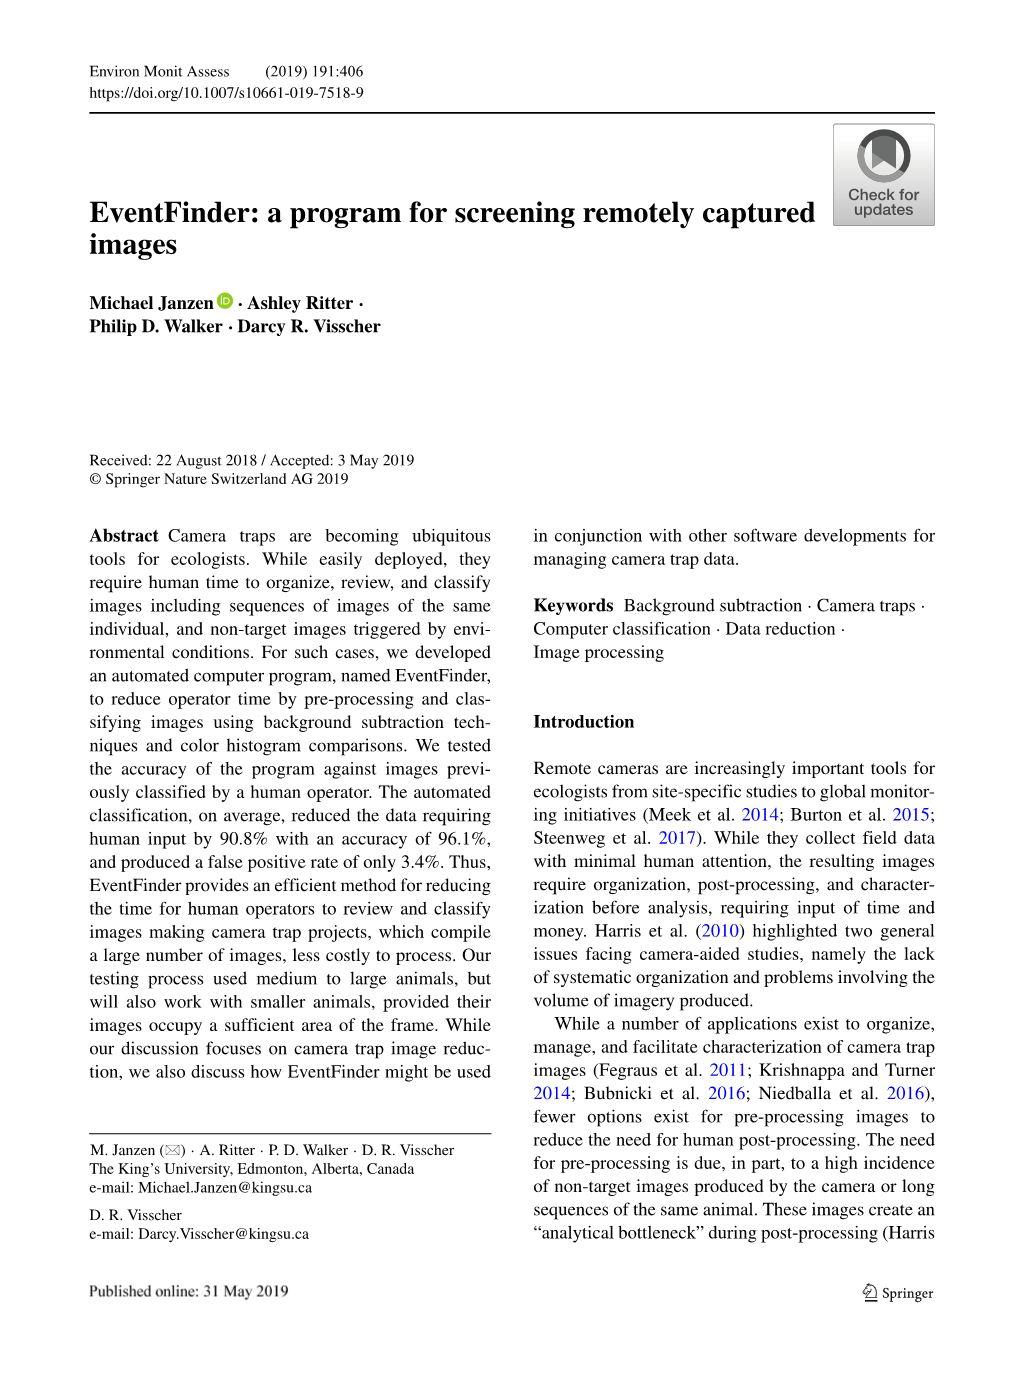 A Program for Screening Remotely Captured Images